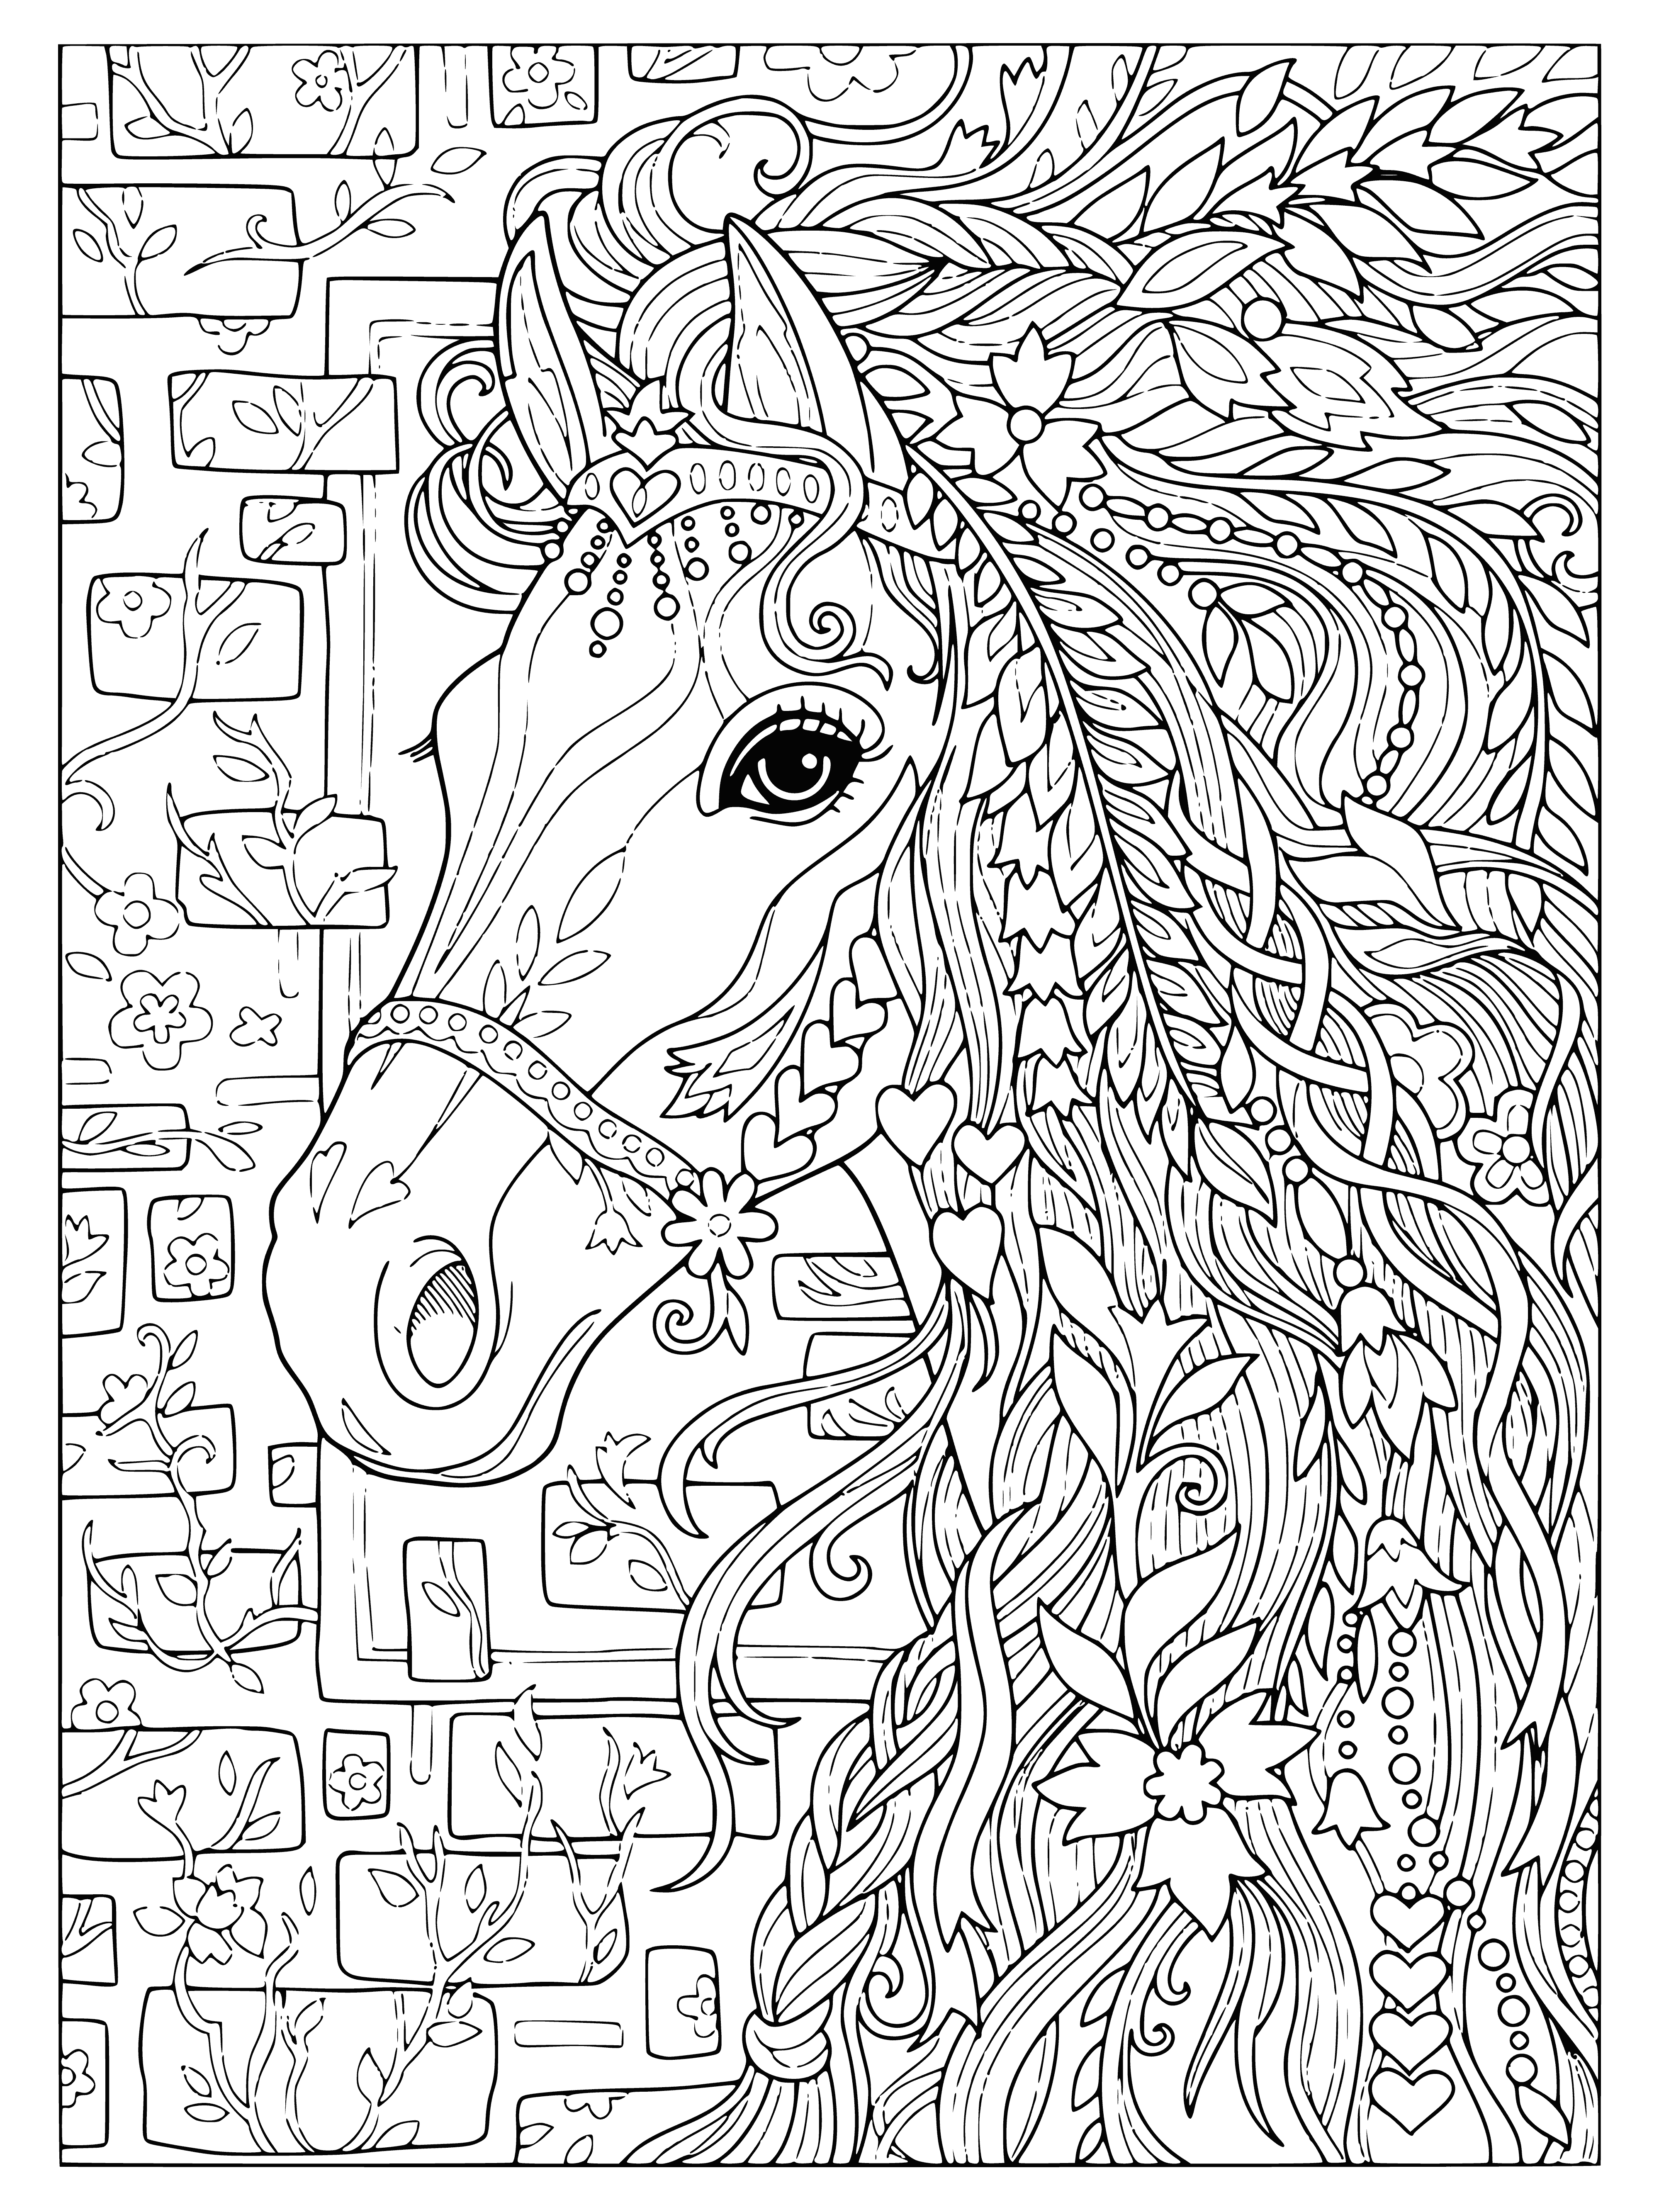 coloring page: A black maned horse gallops through a green field of yellow flowers.